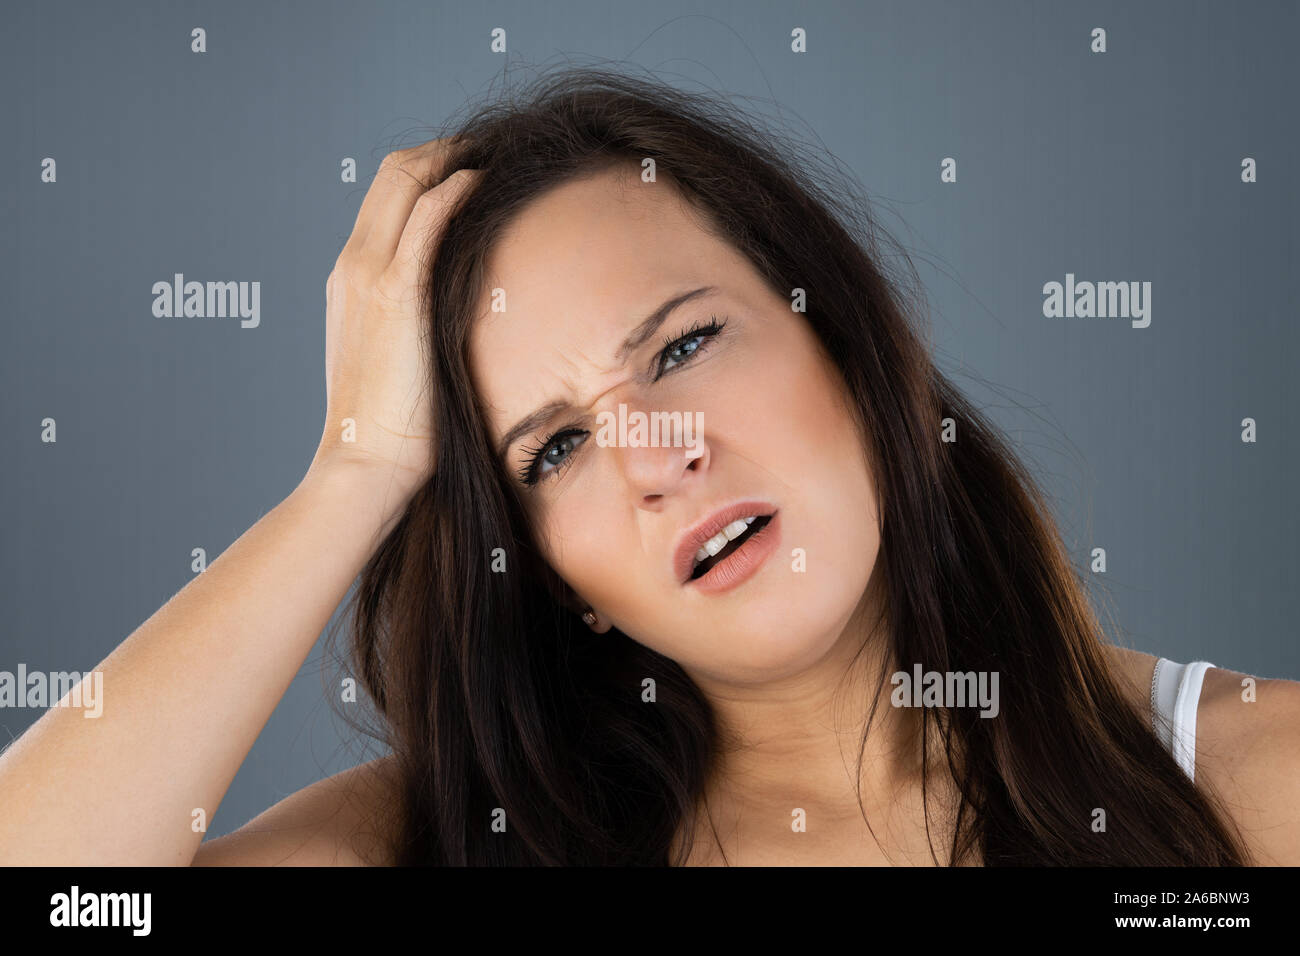 Young Woman Scratching Her Itchy Head Scalp Stock Photo